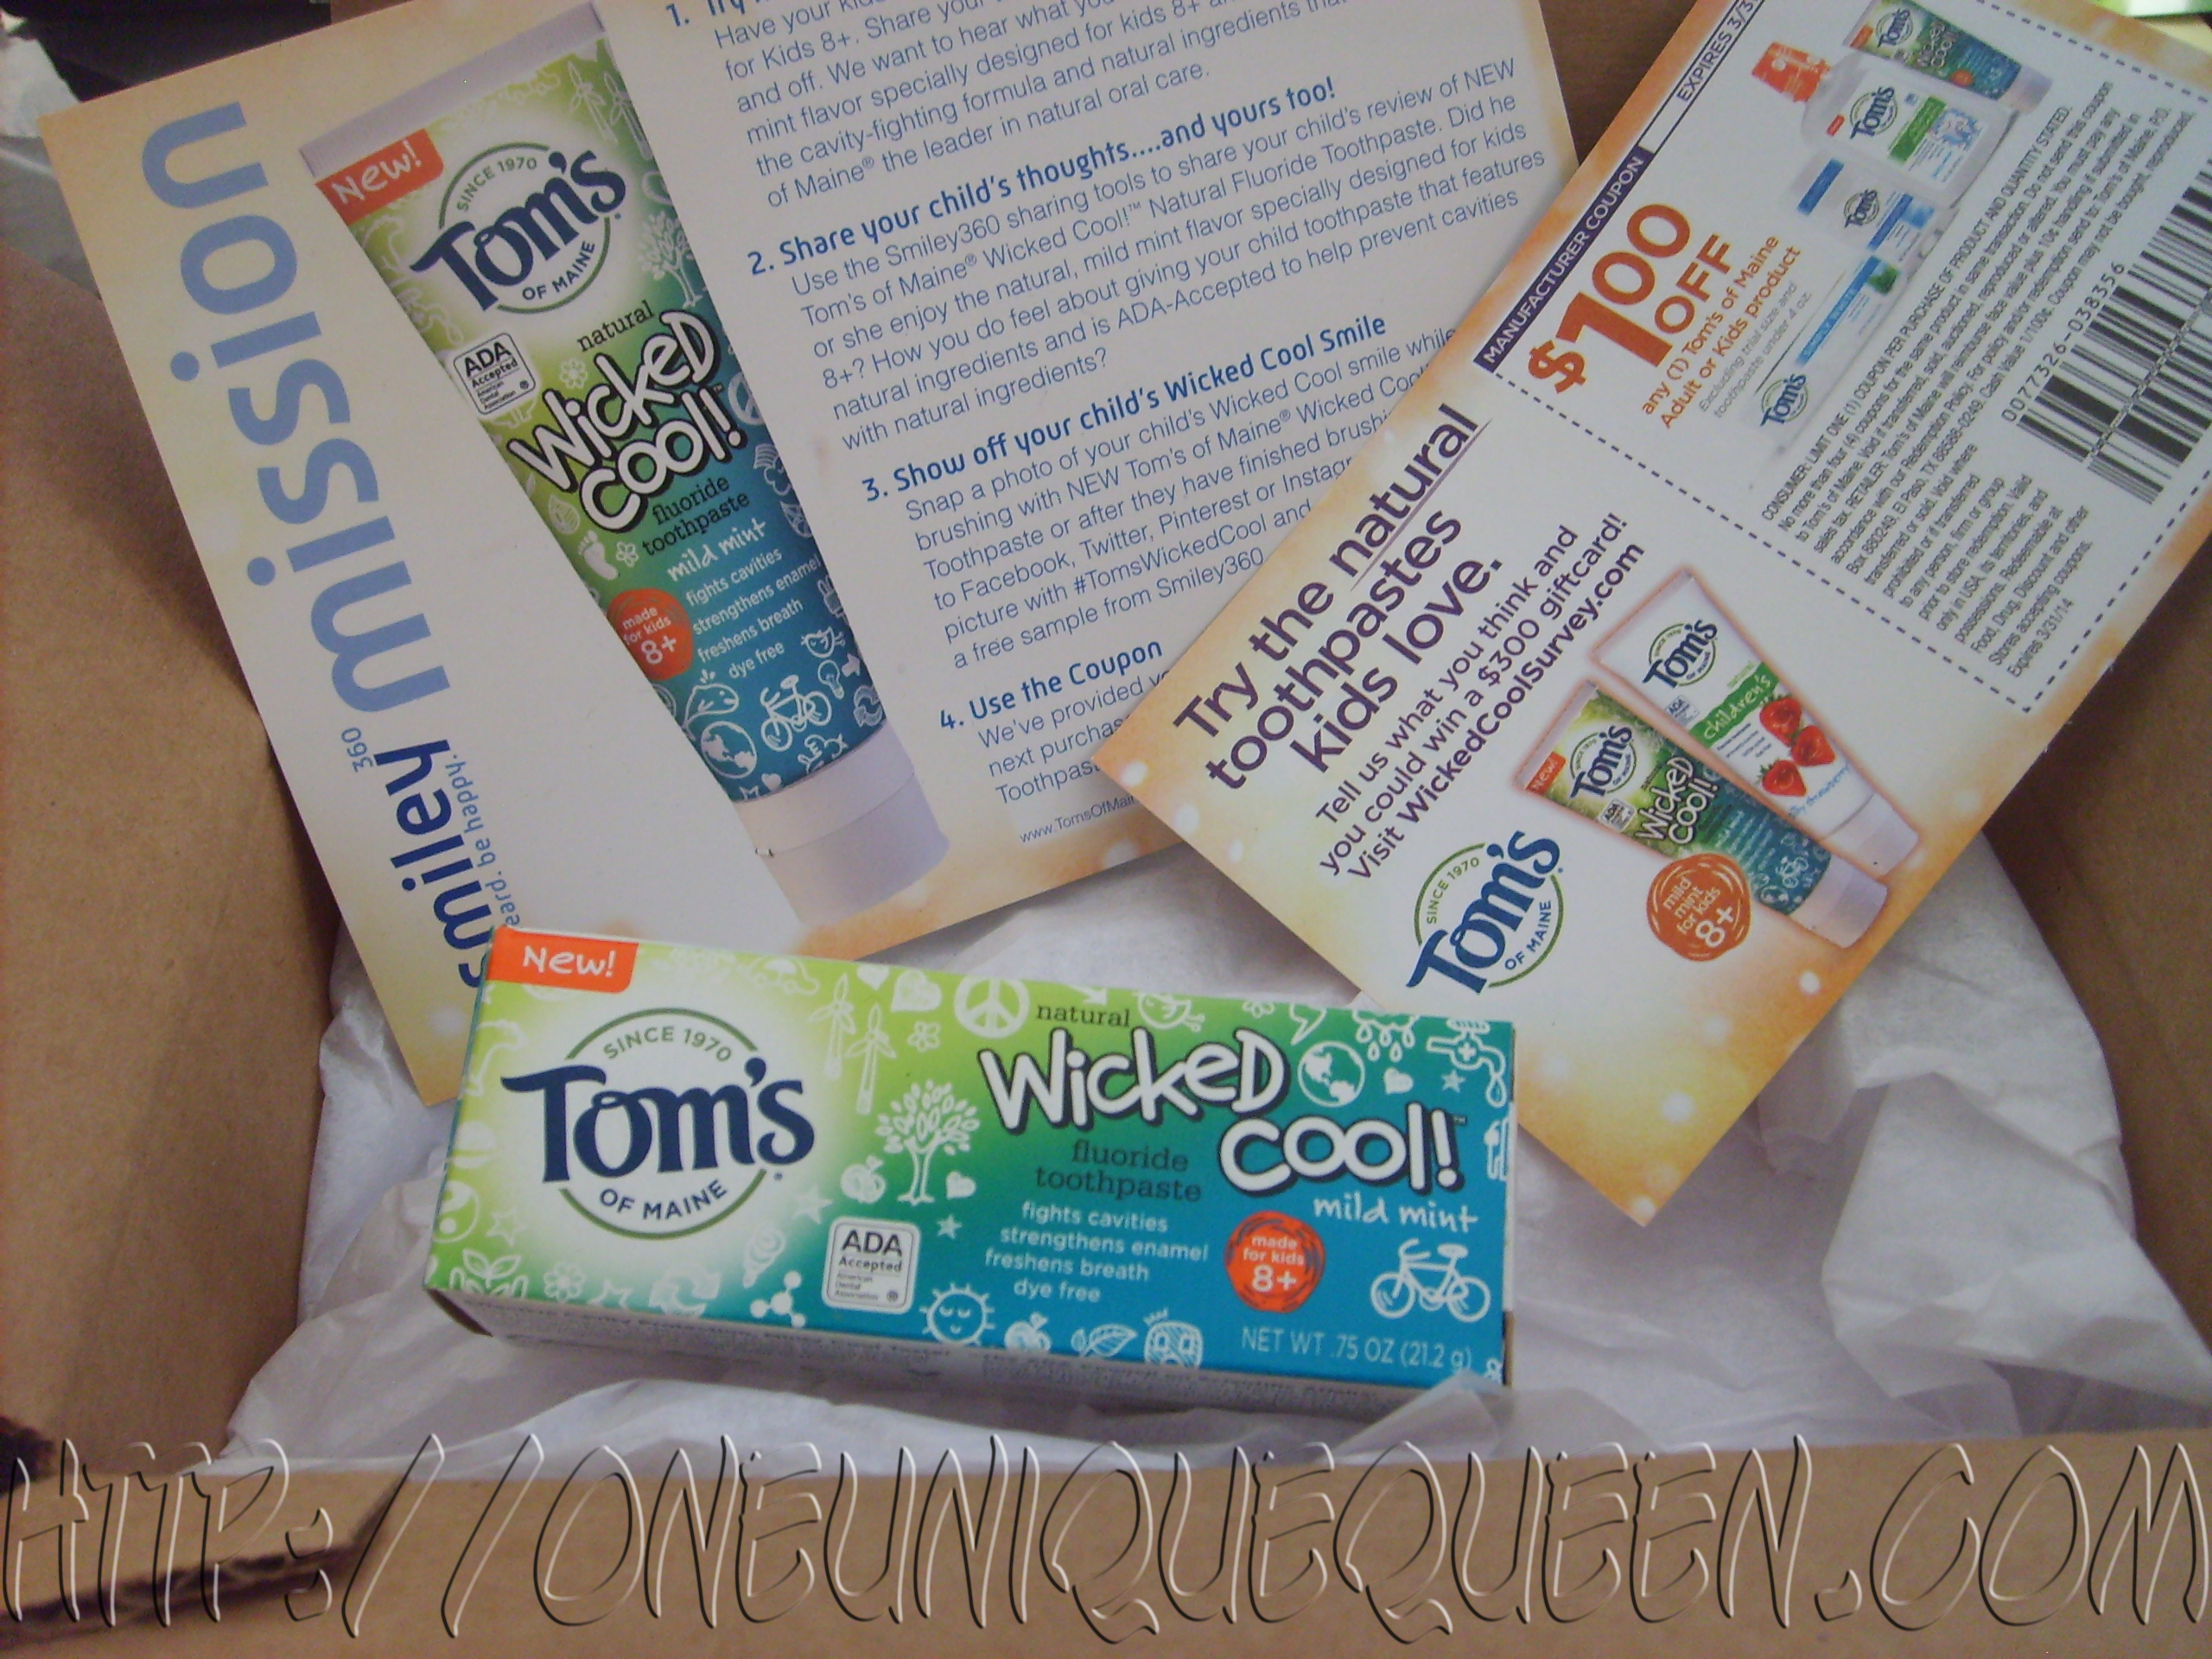 [Smiley360 Mission Review] New Toms of Maine® Wicked Cool! Toothpaste for Kids 8+